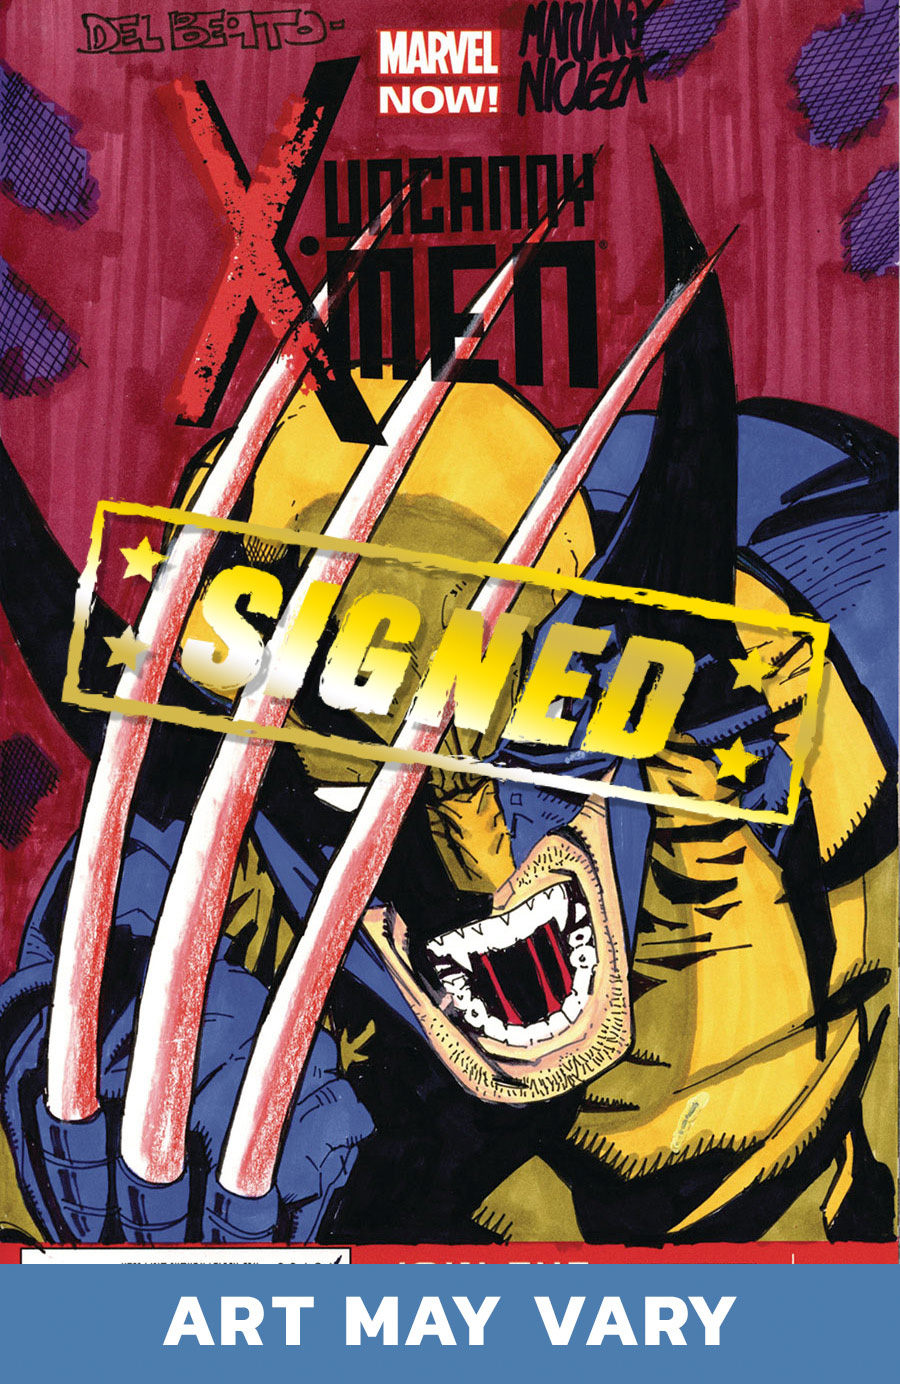 Marvel Comics Commissioned Cover Art Signed & Remarked By Mariano Nicieza & Joe Delbeato With A Wolverine Hand-Drawn Sketch